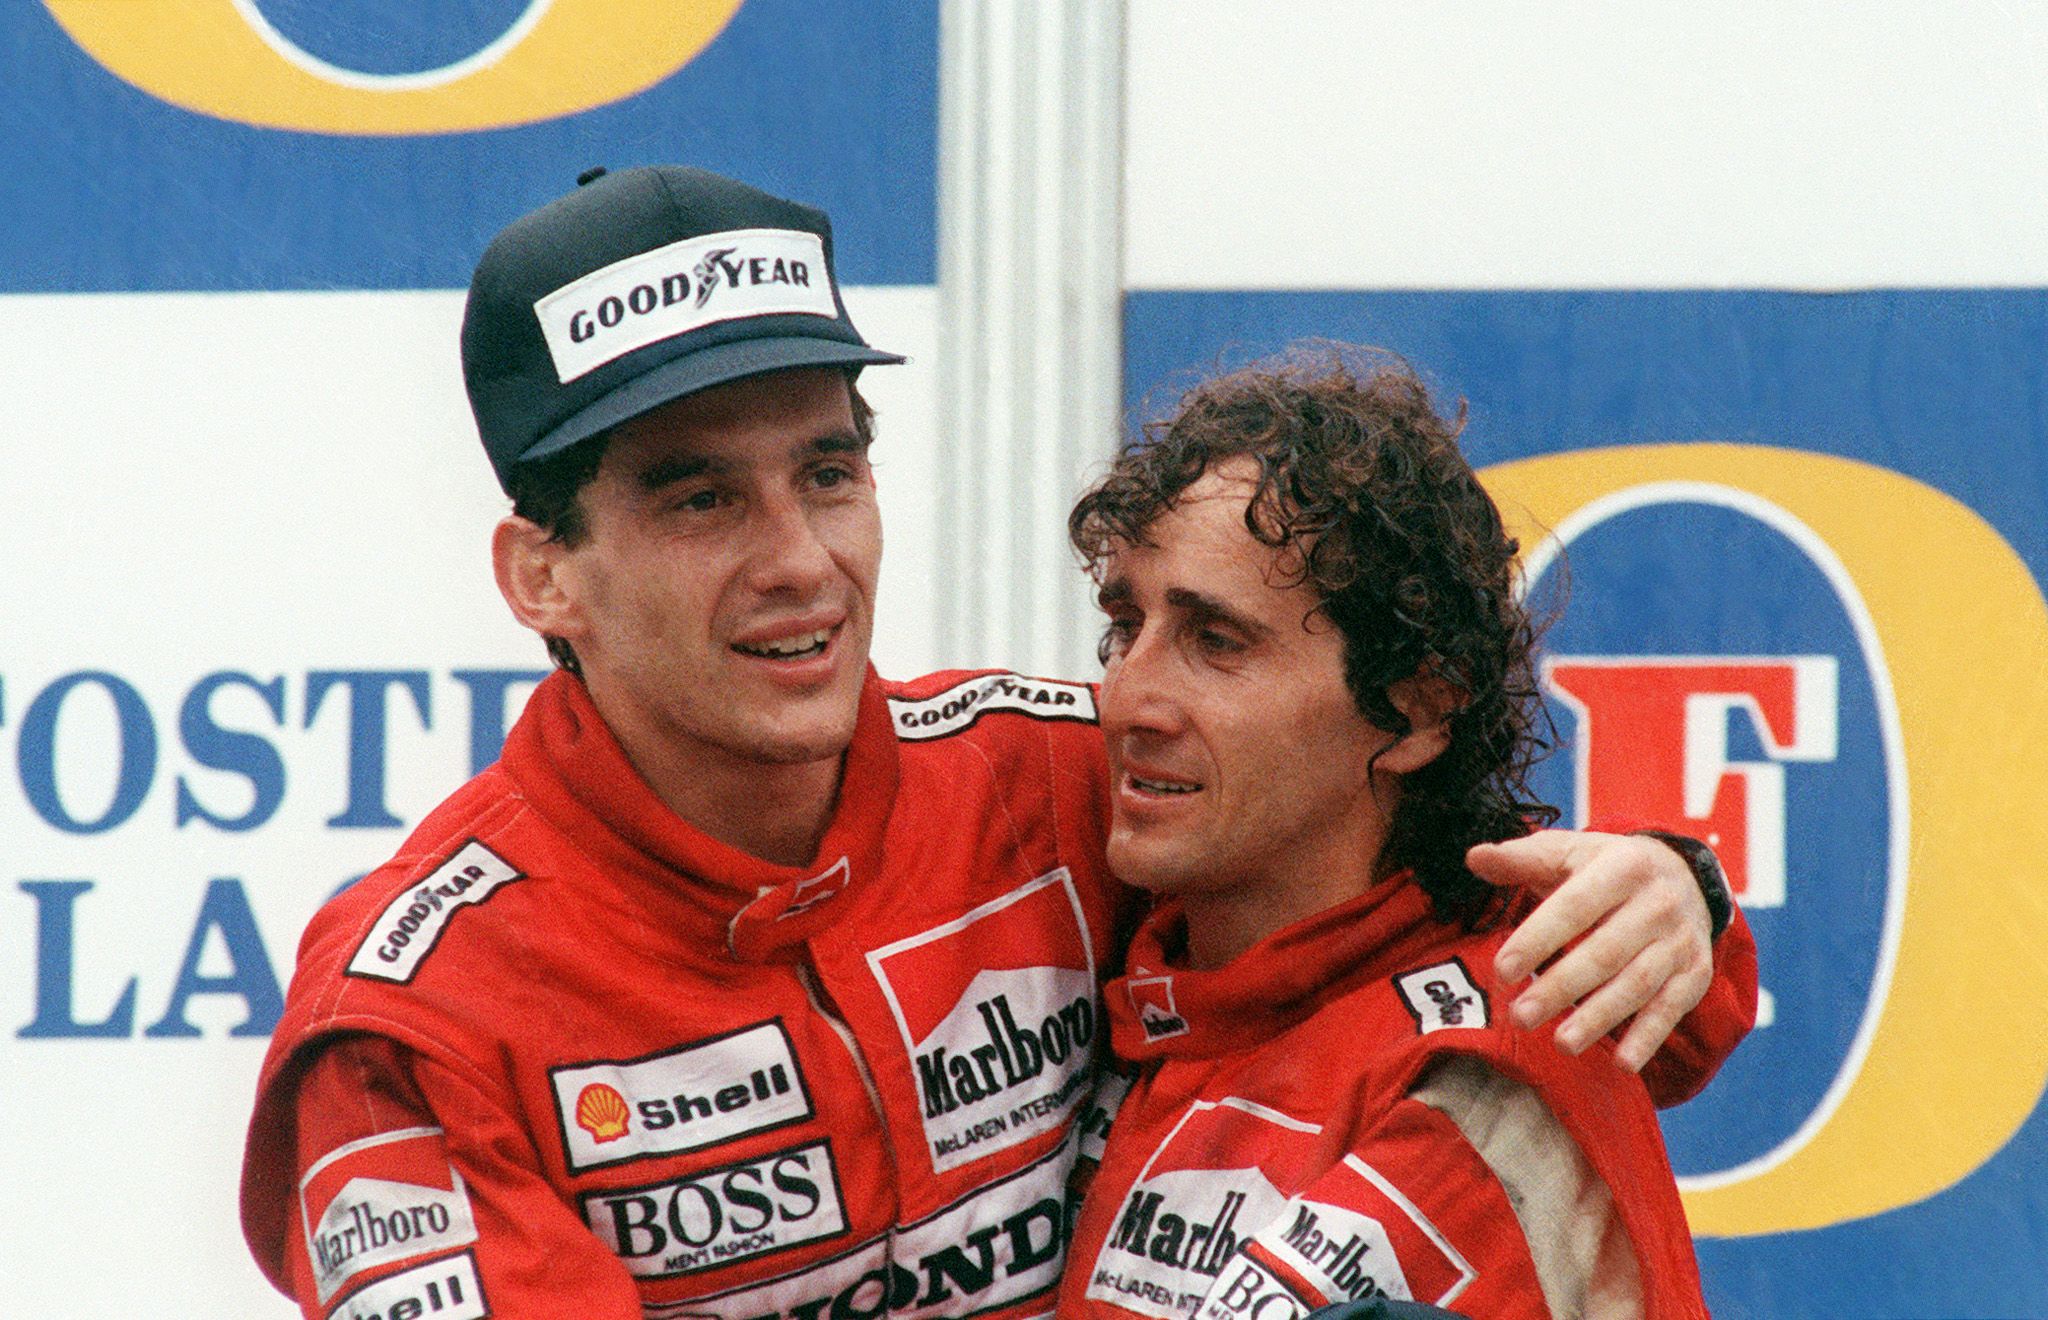 The Surprising Bond Between Prost and Senna